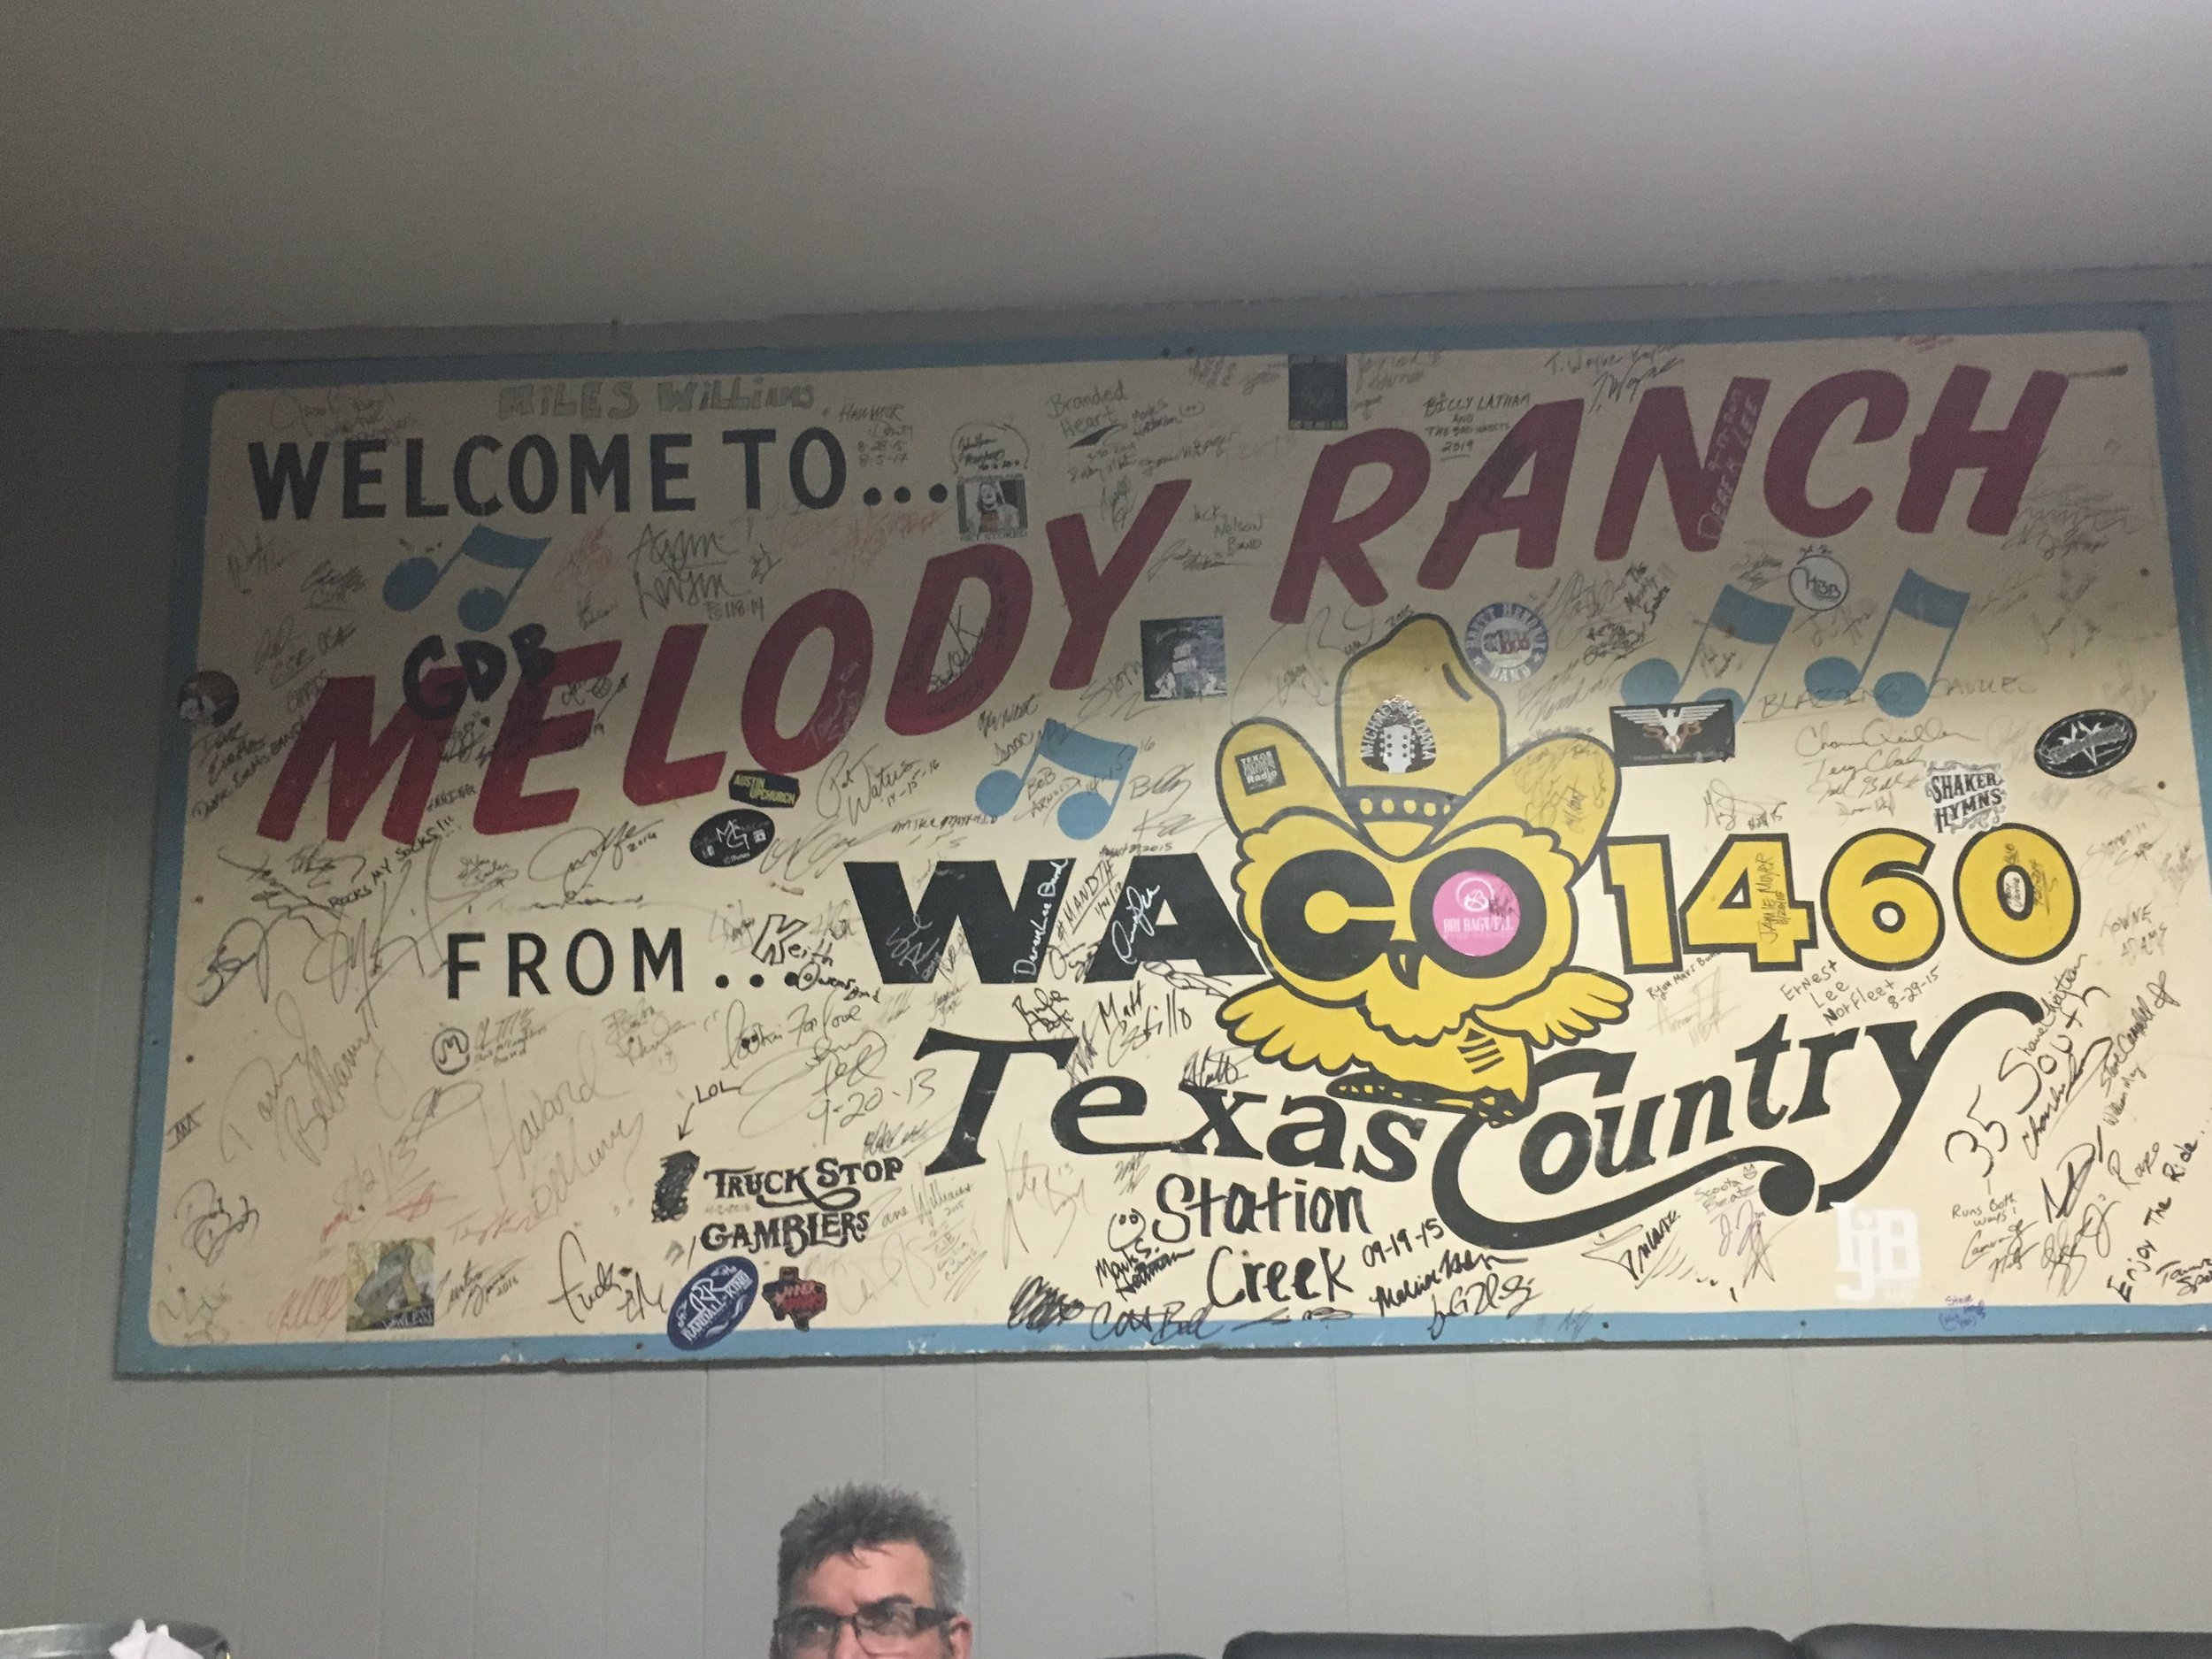 THE MELODY RANCH